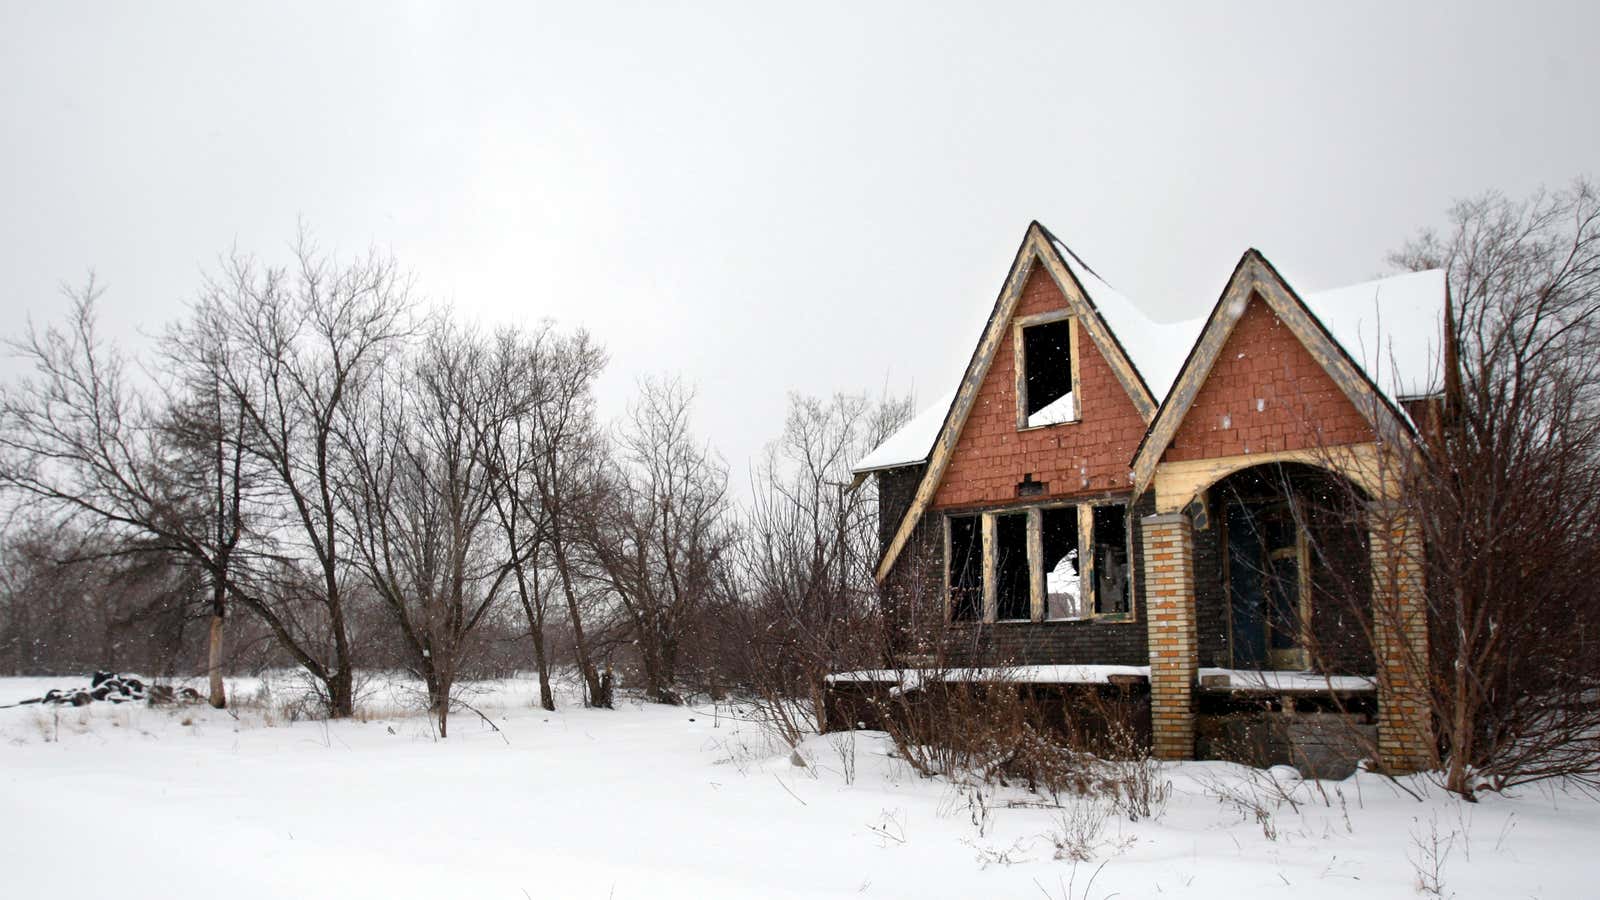 Now is the winter of Detroit’s discontent.